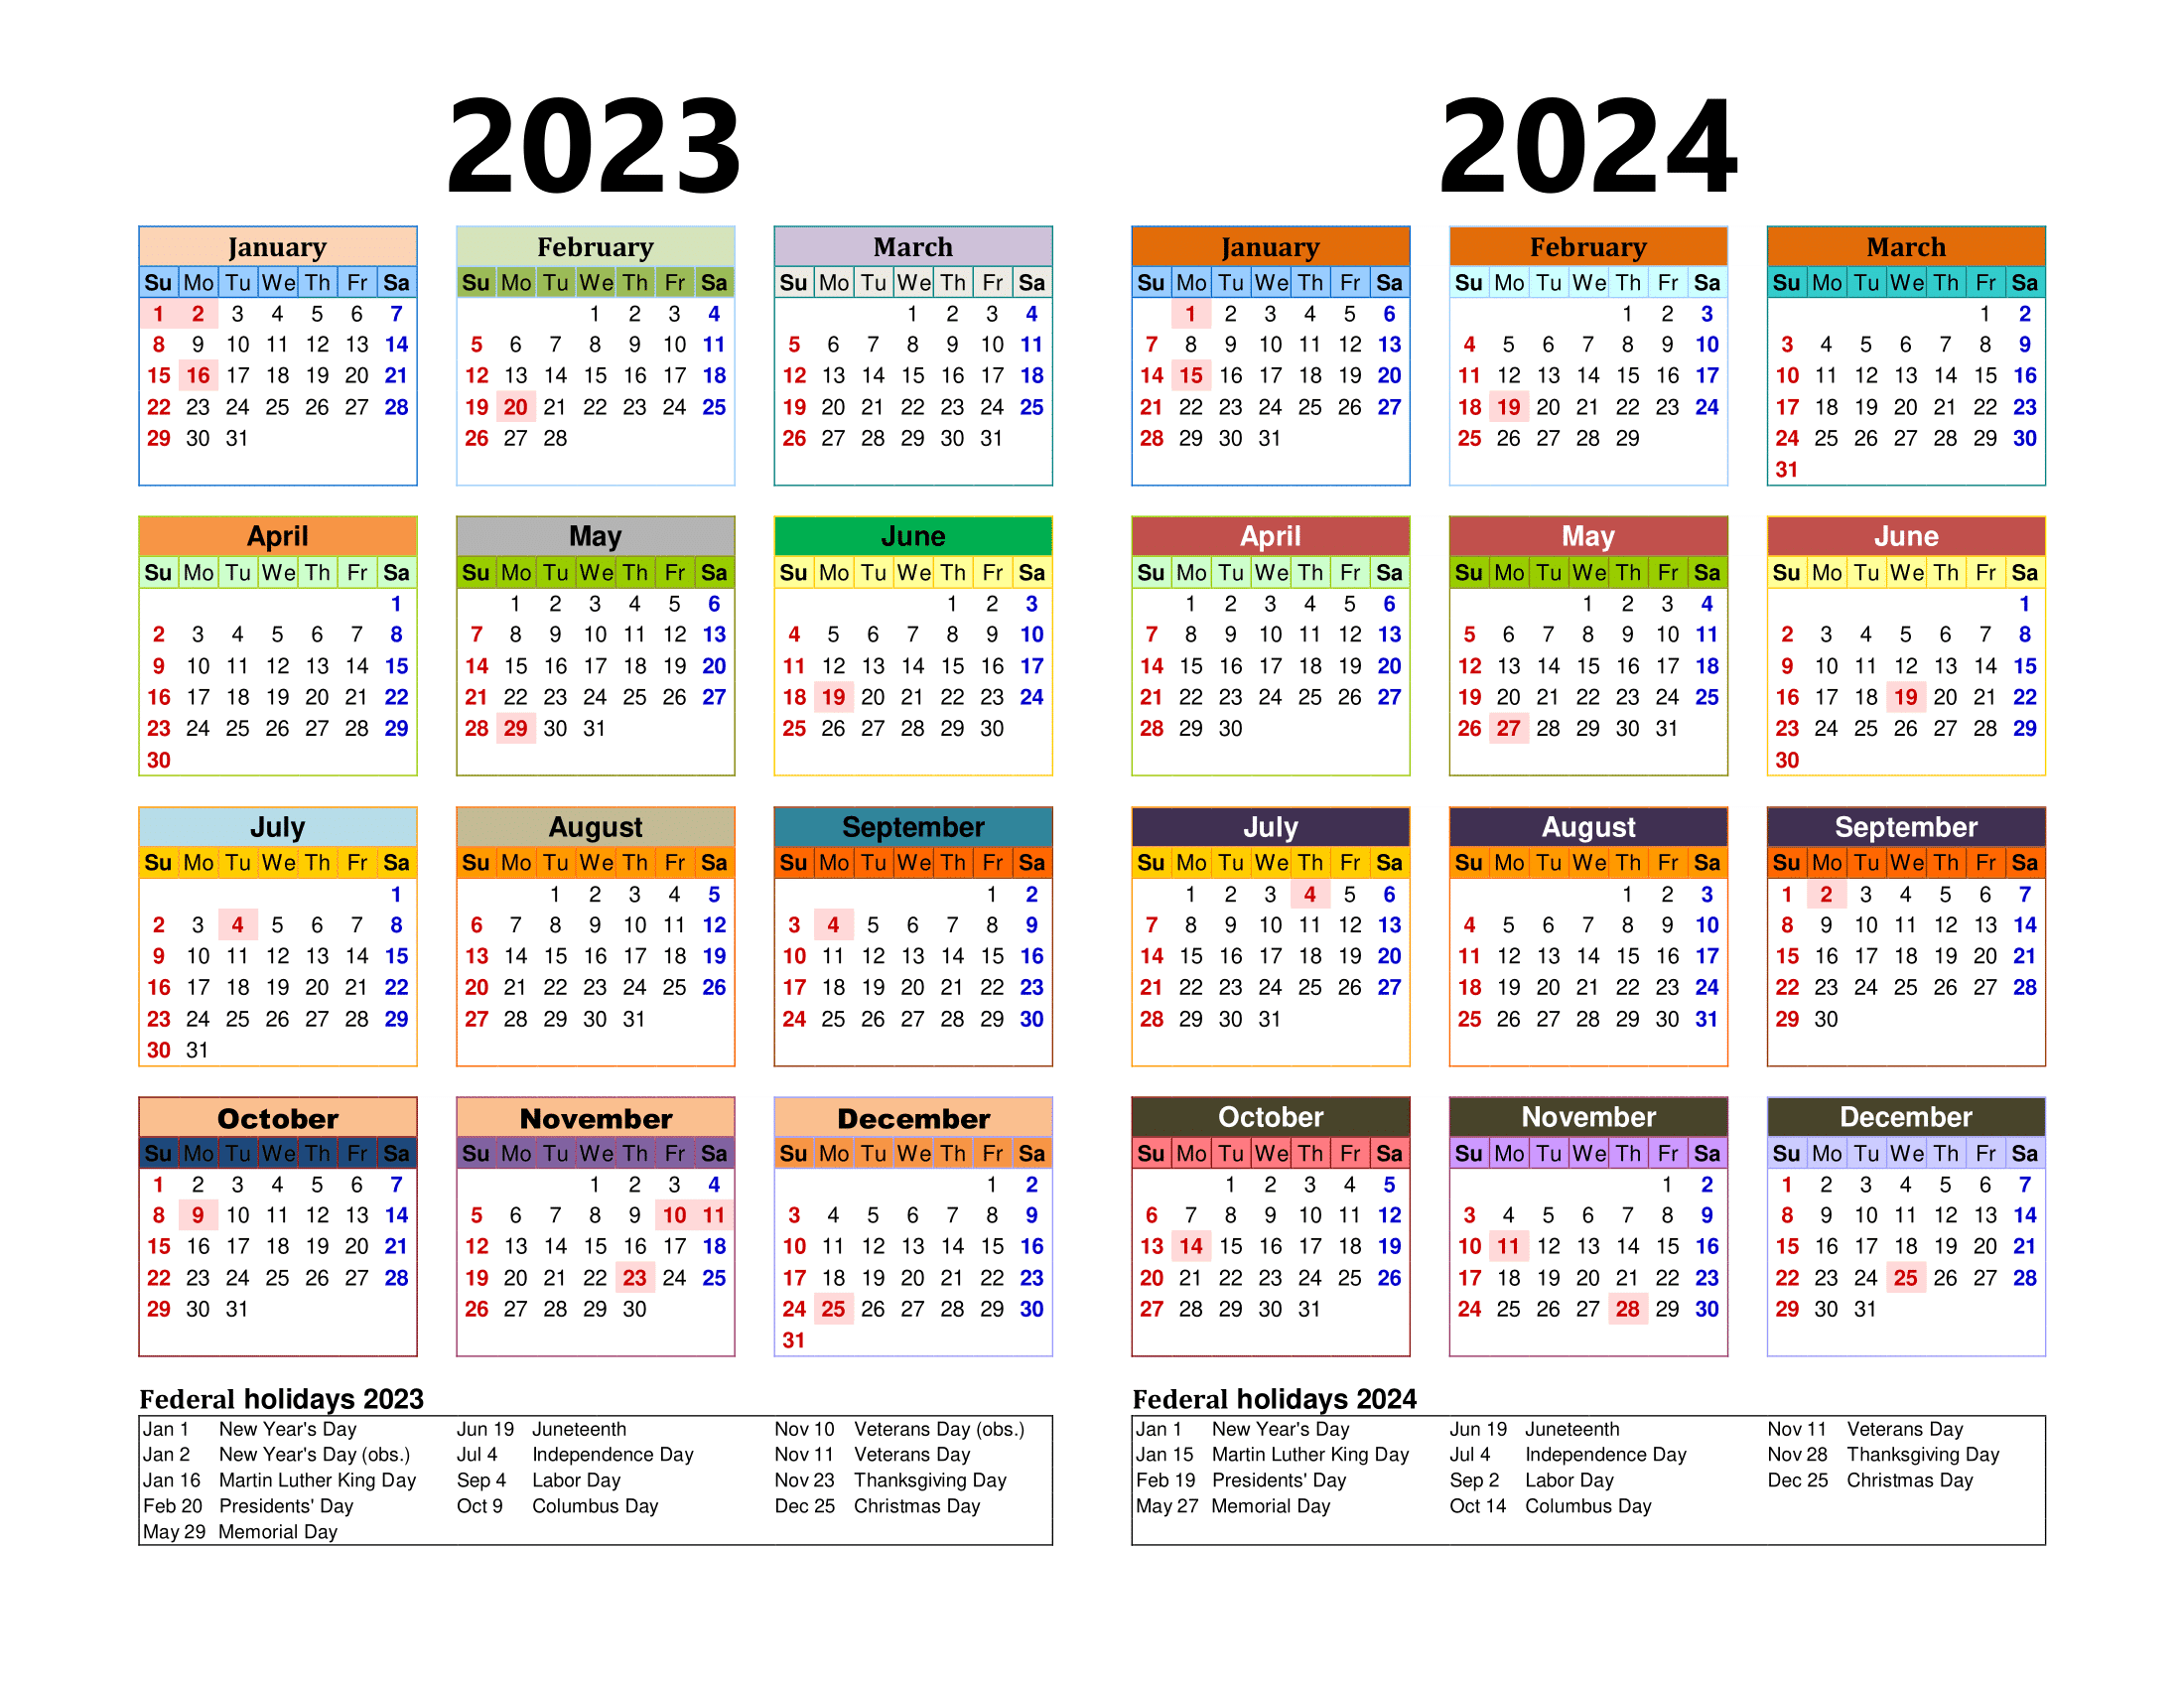 Free Printable Two Year Calendar Templates For 2023 And 2024 In Pdf for Calendar Printable 2023 2024